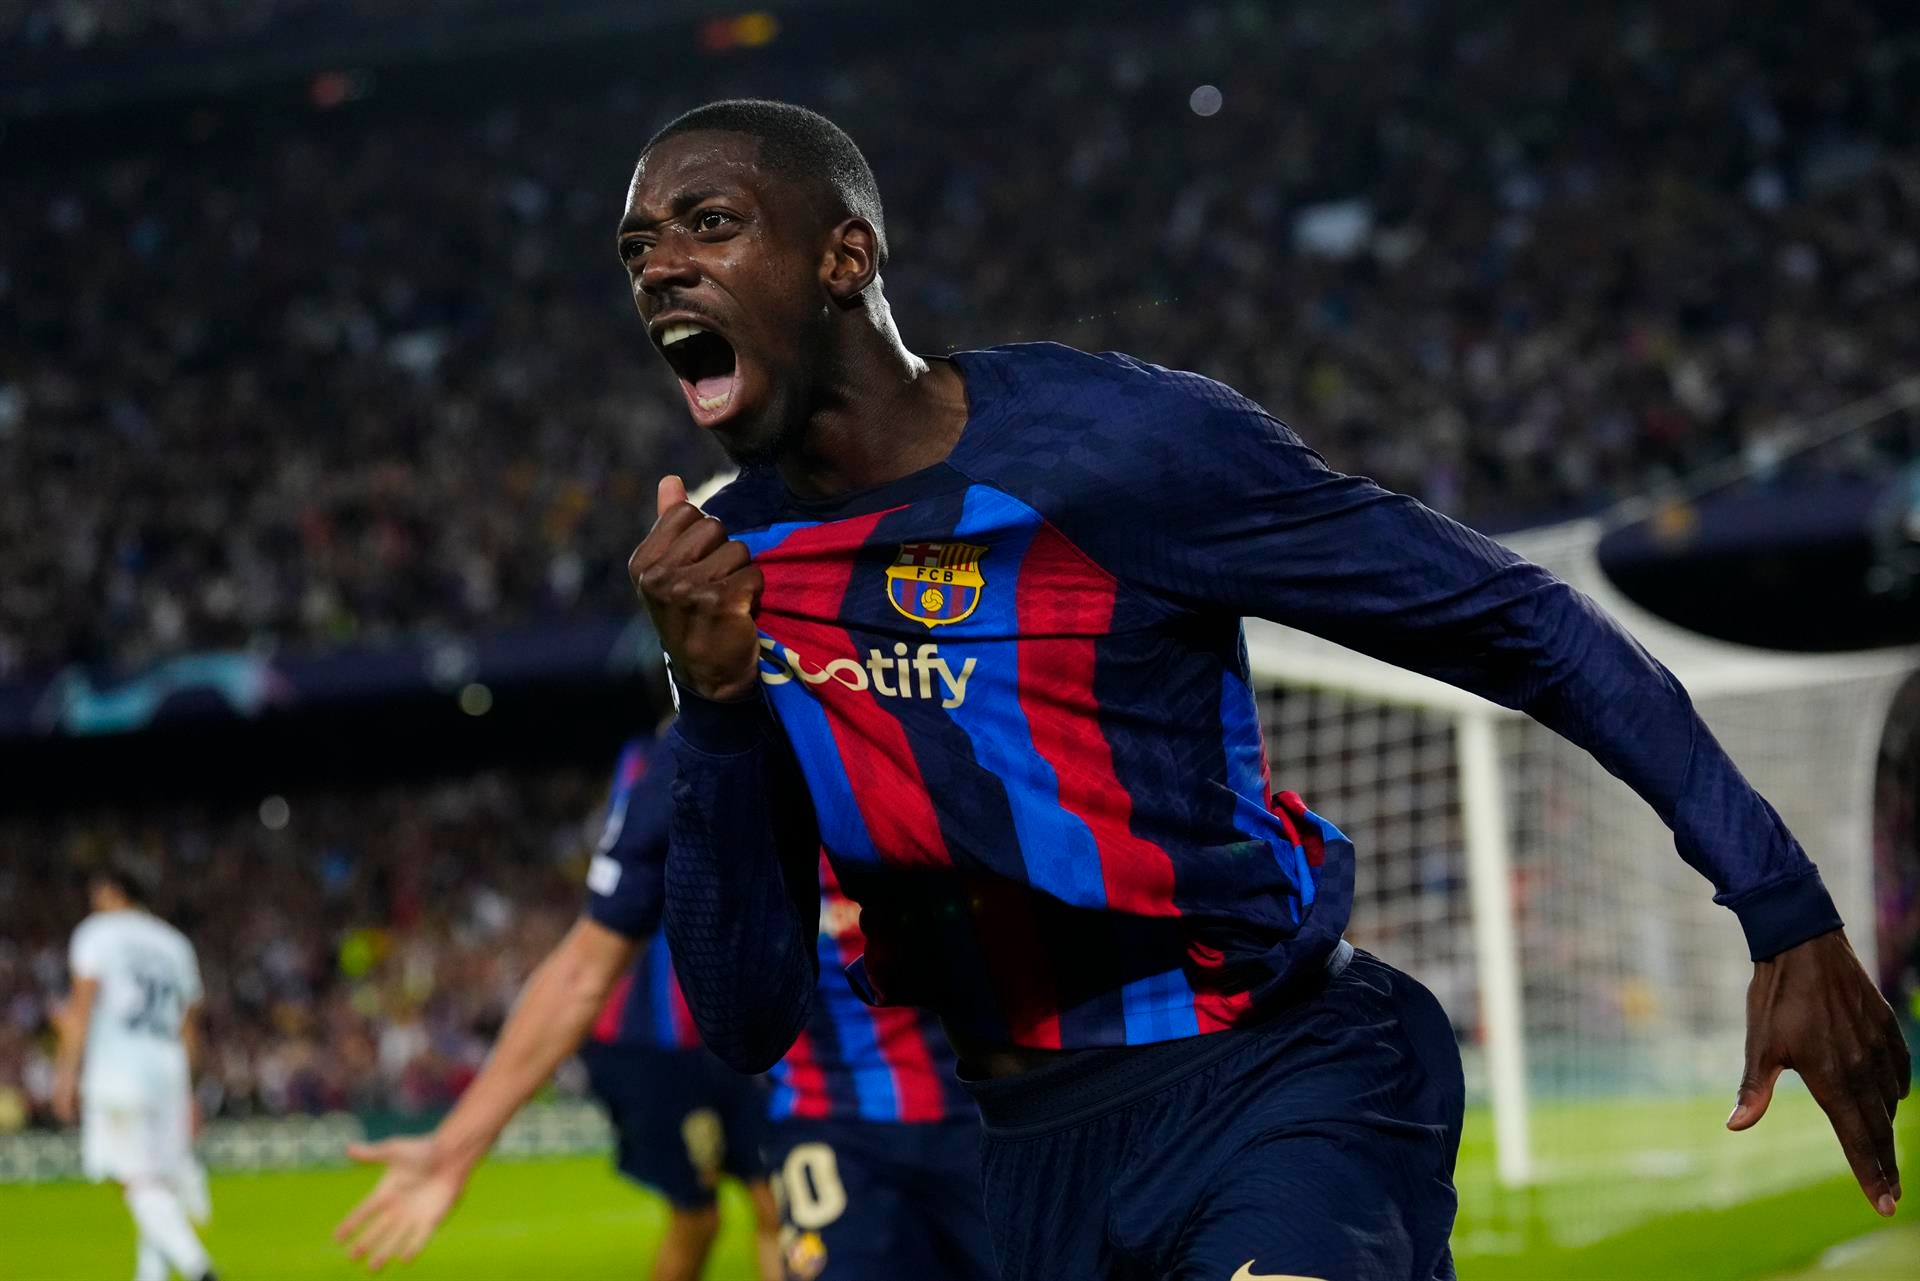 Barca give Dembele 5 days to negotiate with PSG over move